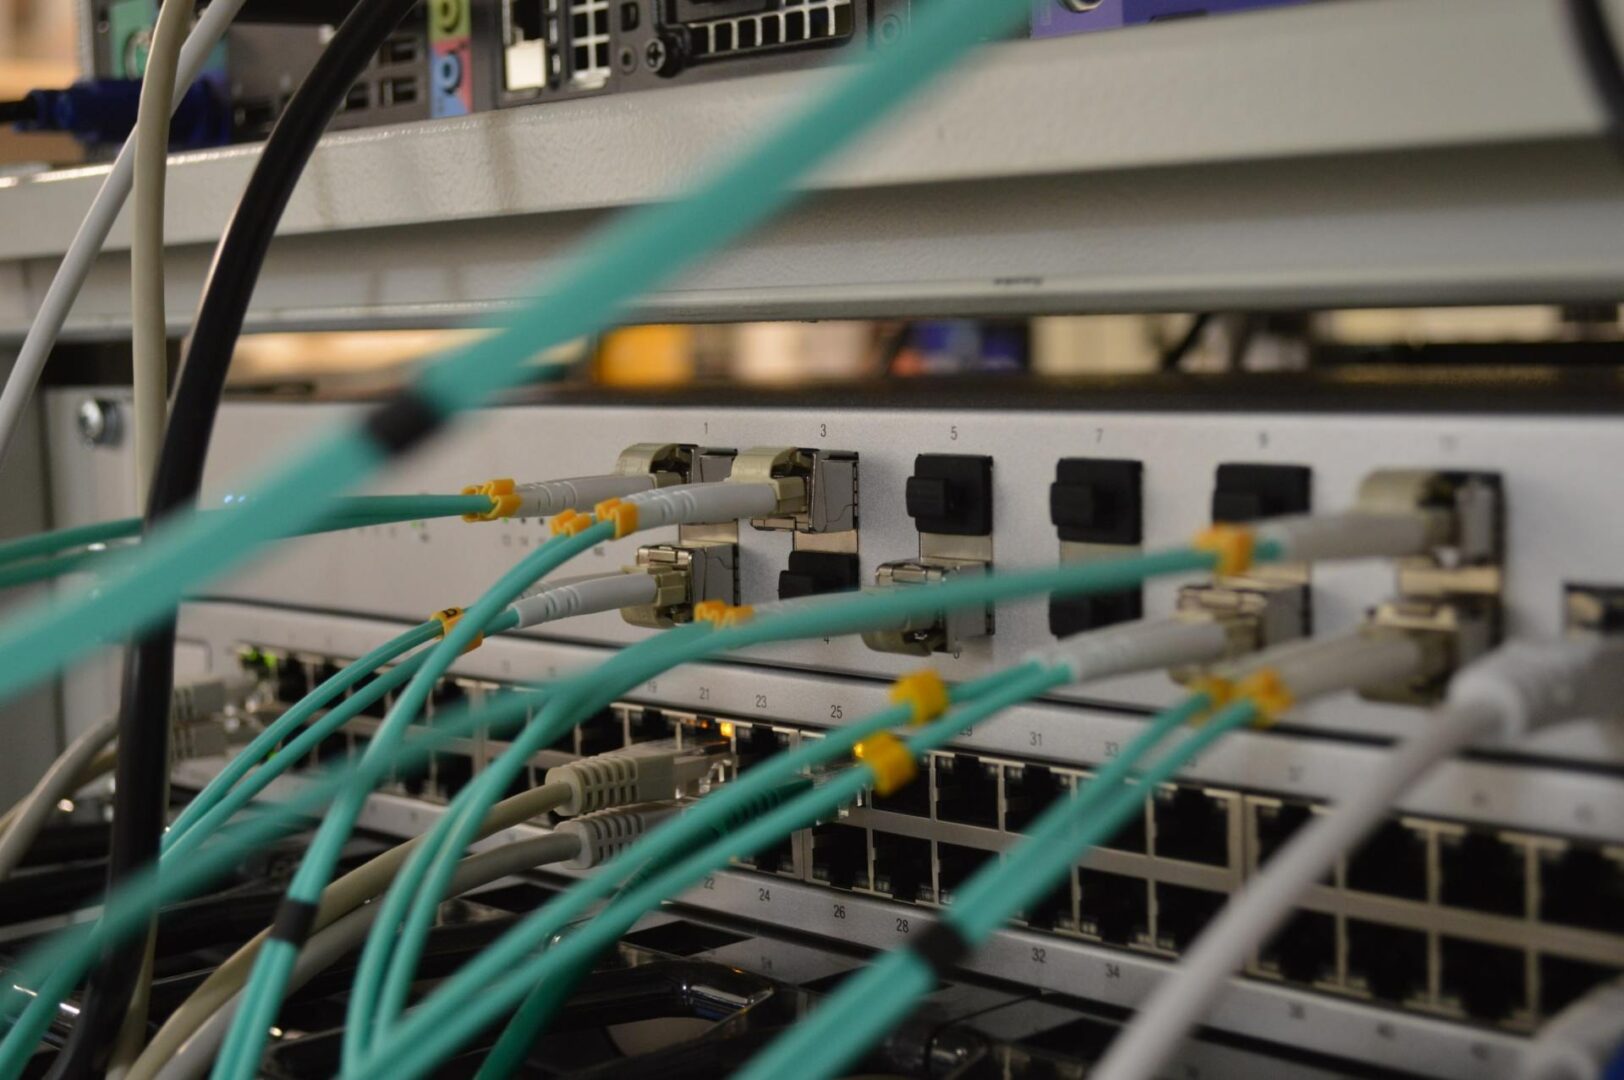 Network cables connected in network switches hub